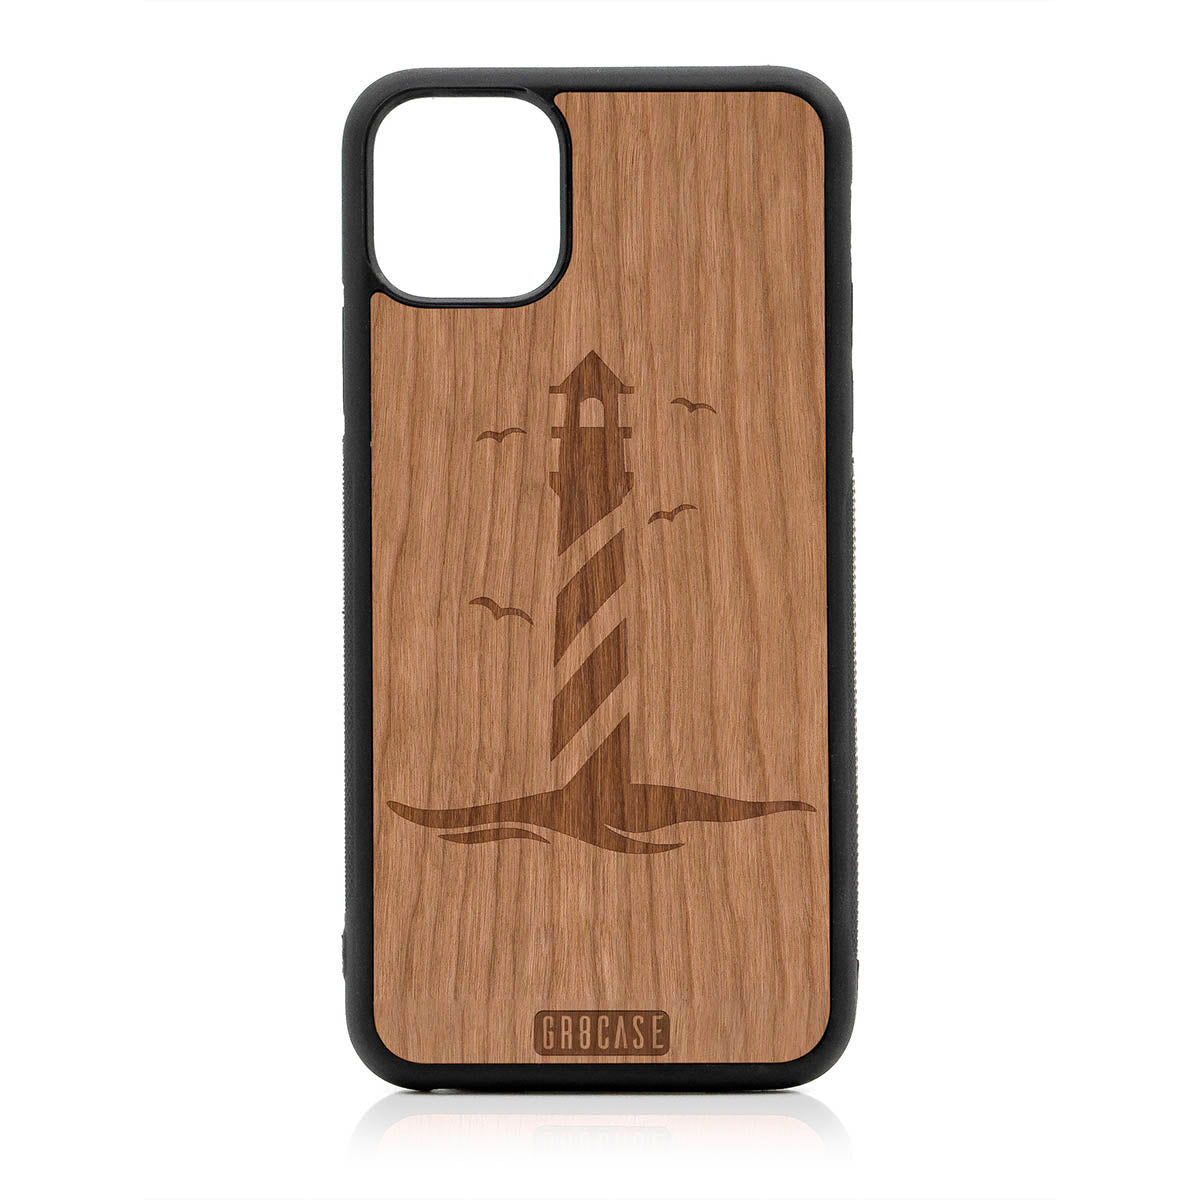 Lighthouse Design Wood Case For iPhone 11 Pro Max